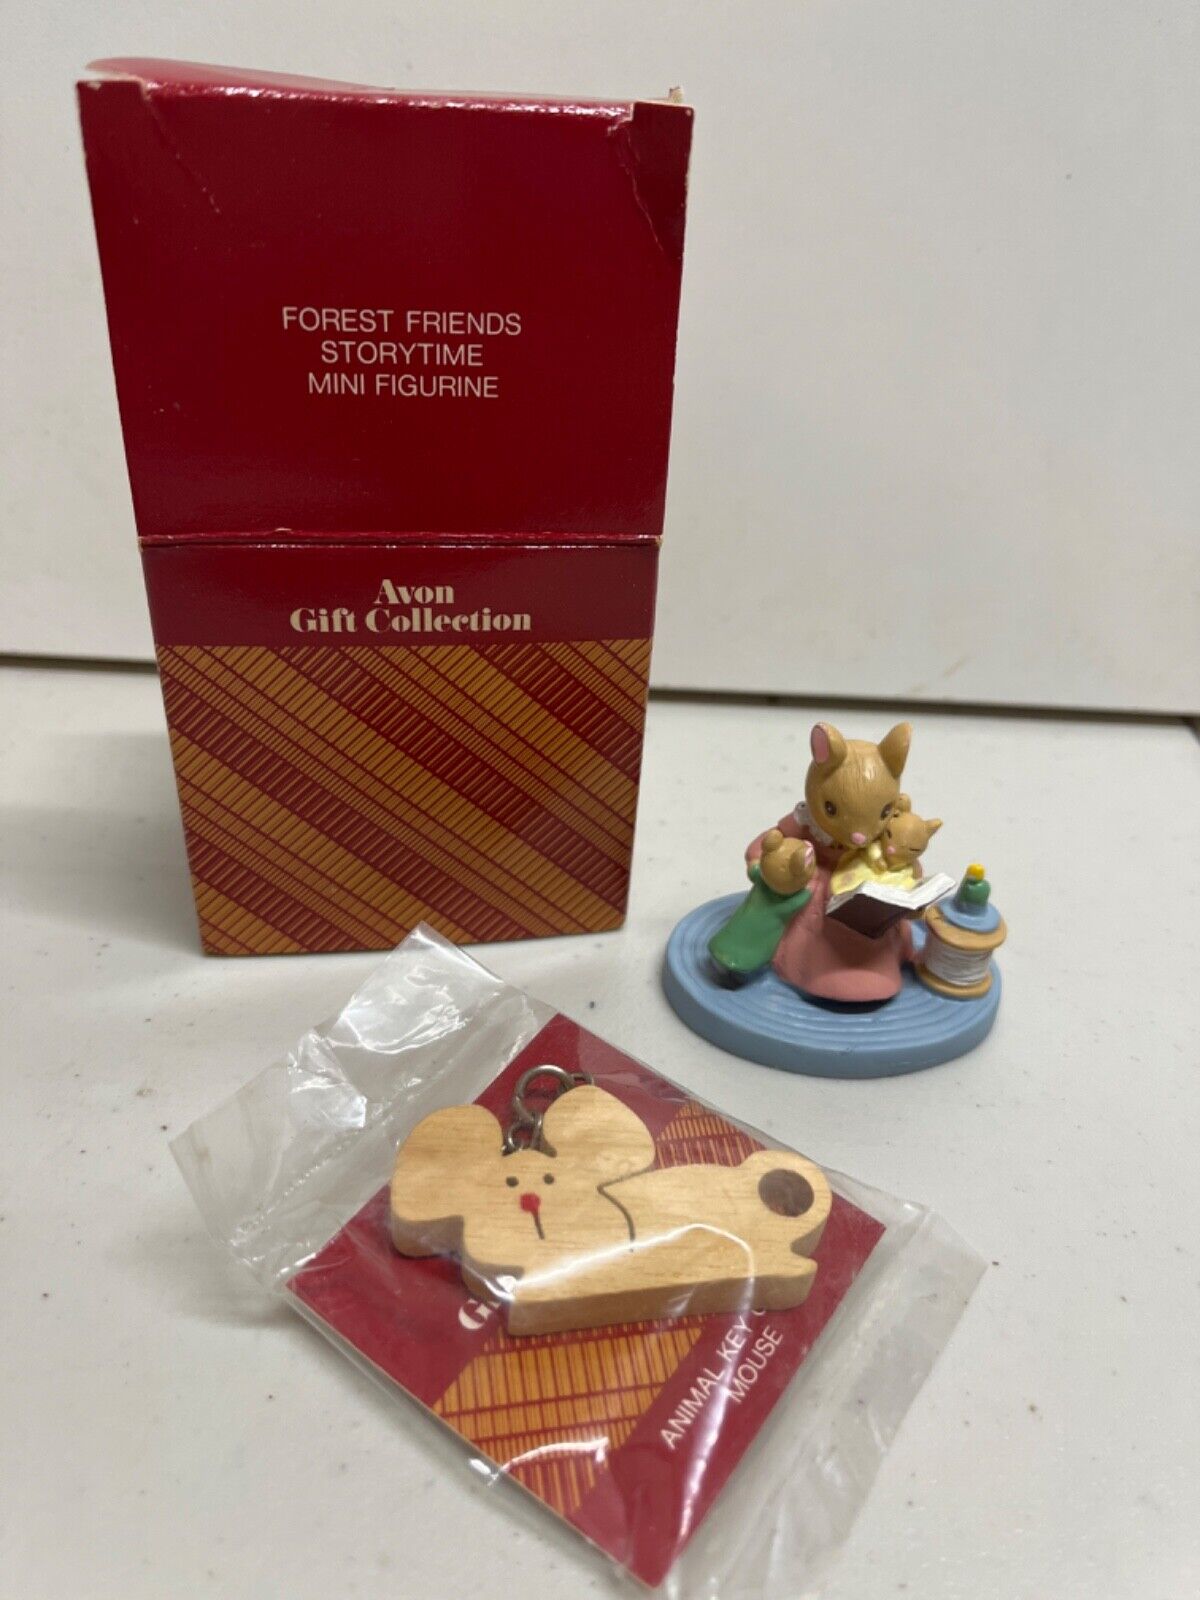 Avon Forest Friends Storytime figurine and Mouse Keychain